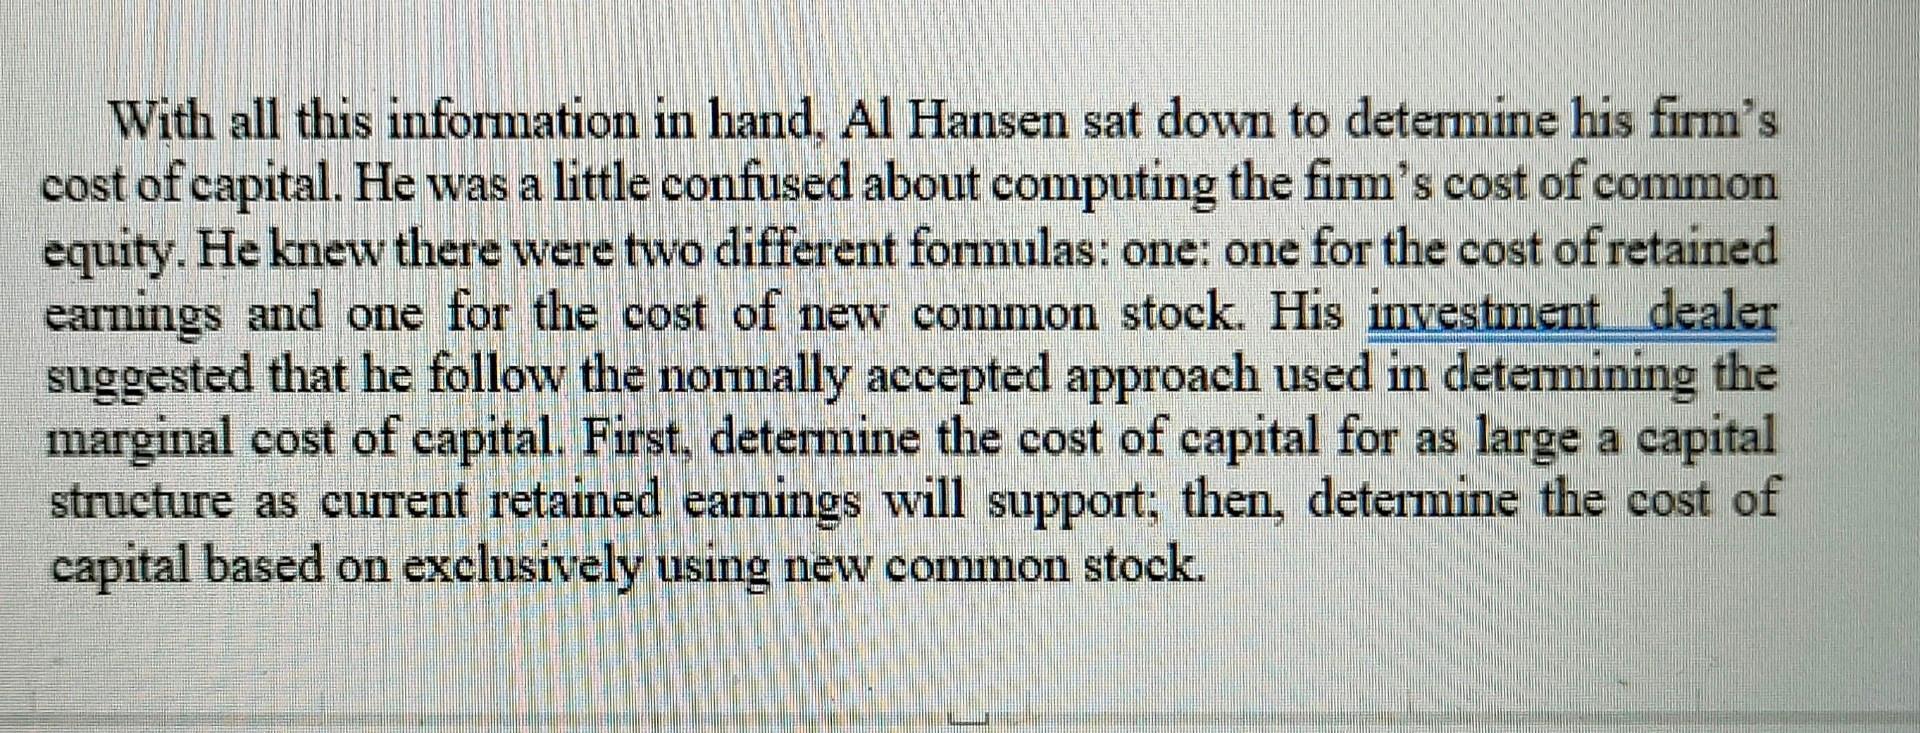 With all this information in hand, Al Hansen sat down to determine his firms cost of capital. He was a little confused about